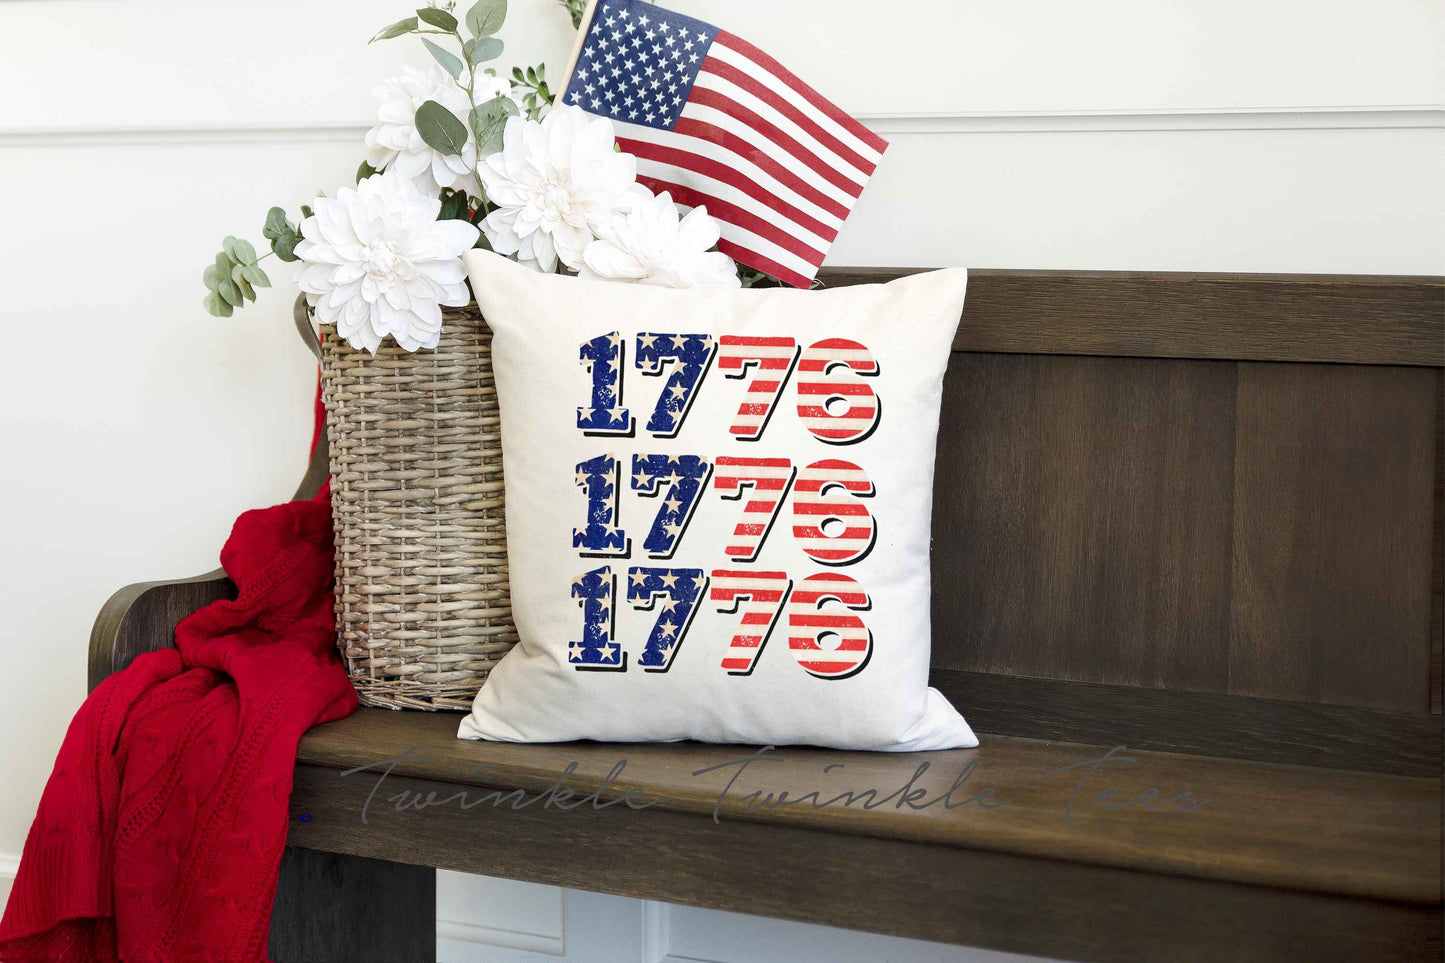 1776 Beige 16 x 16 Throw Pillow, 4th of July Home Decor, Independence Day Home Decor